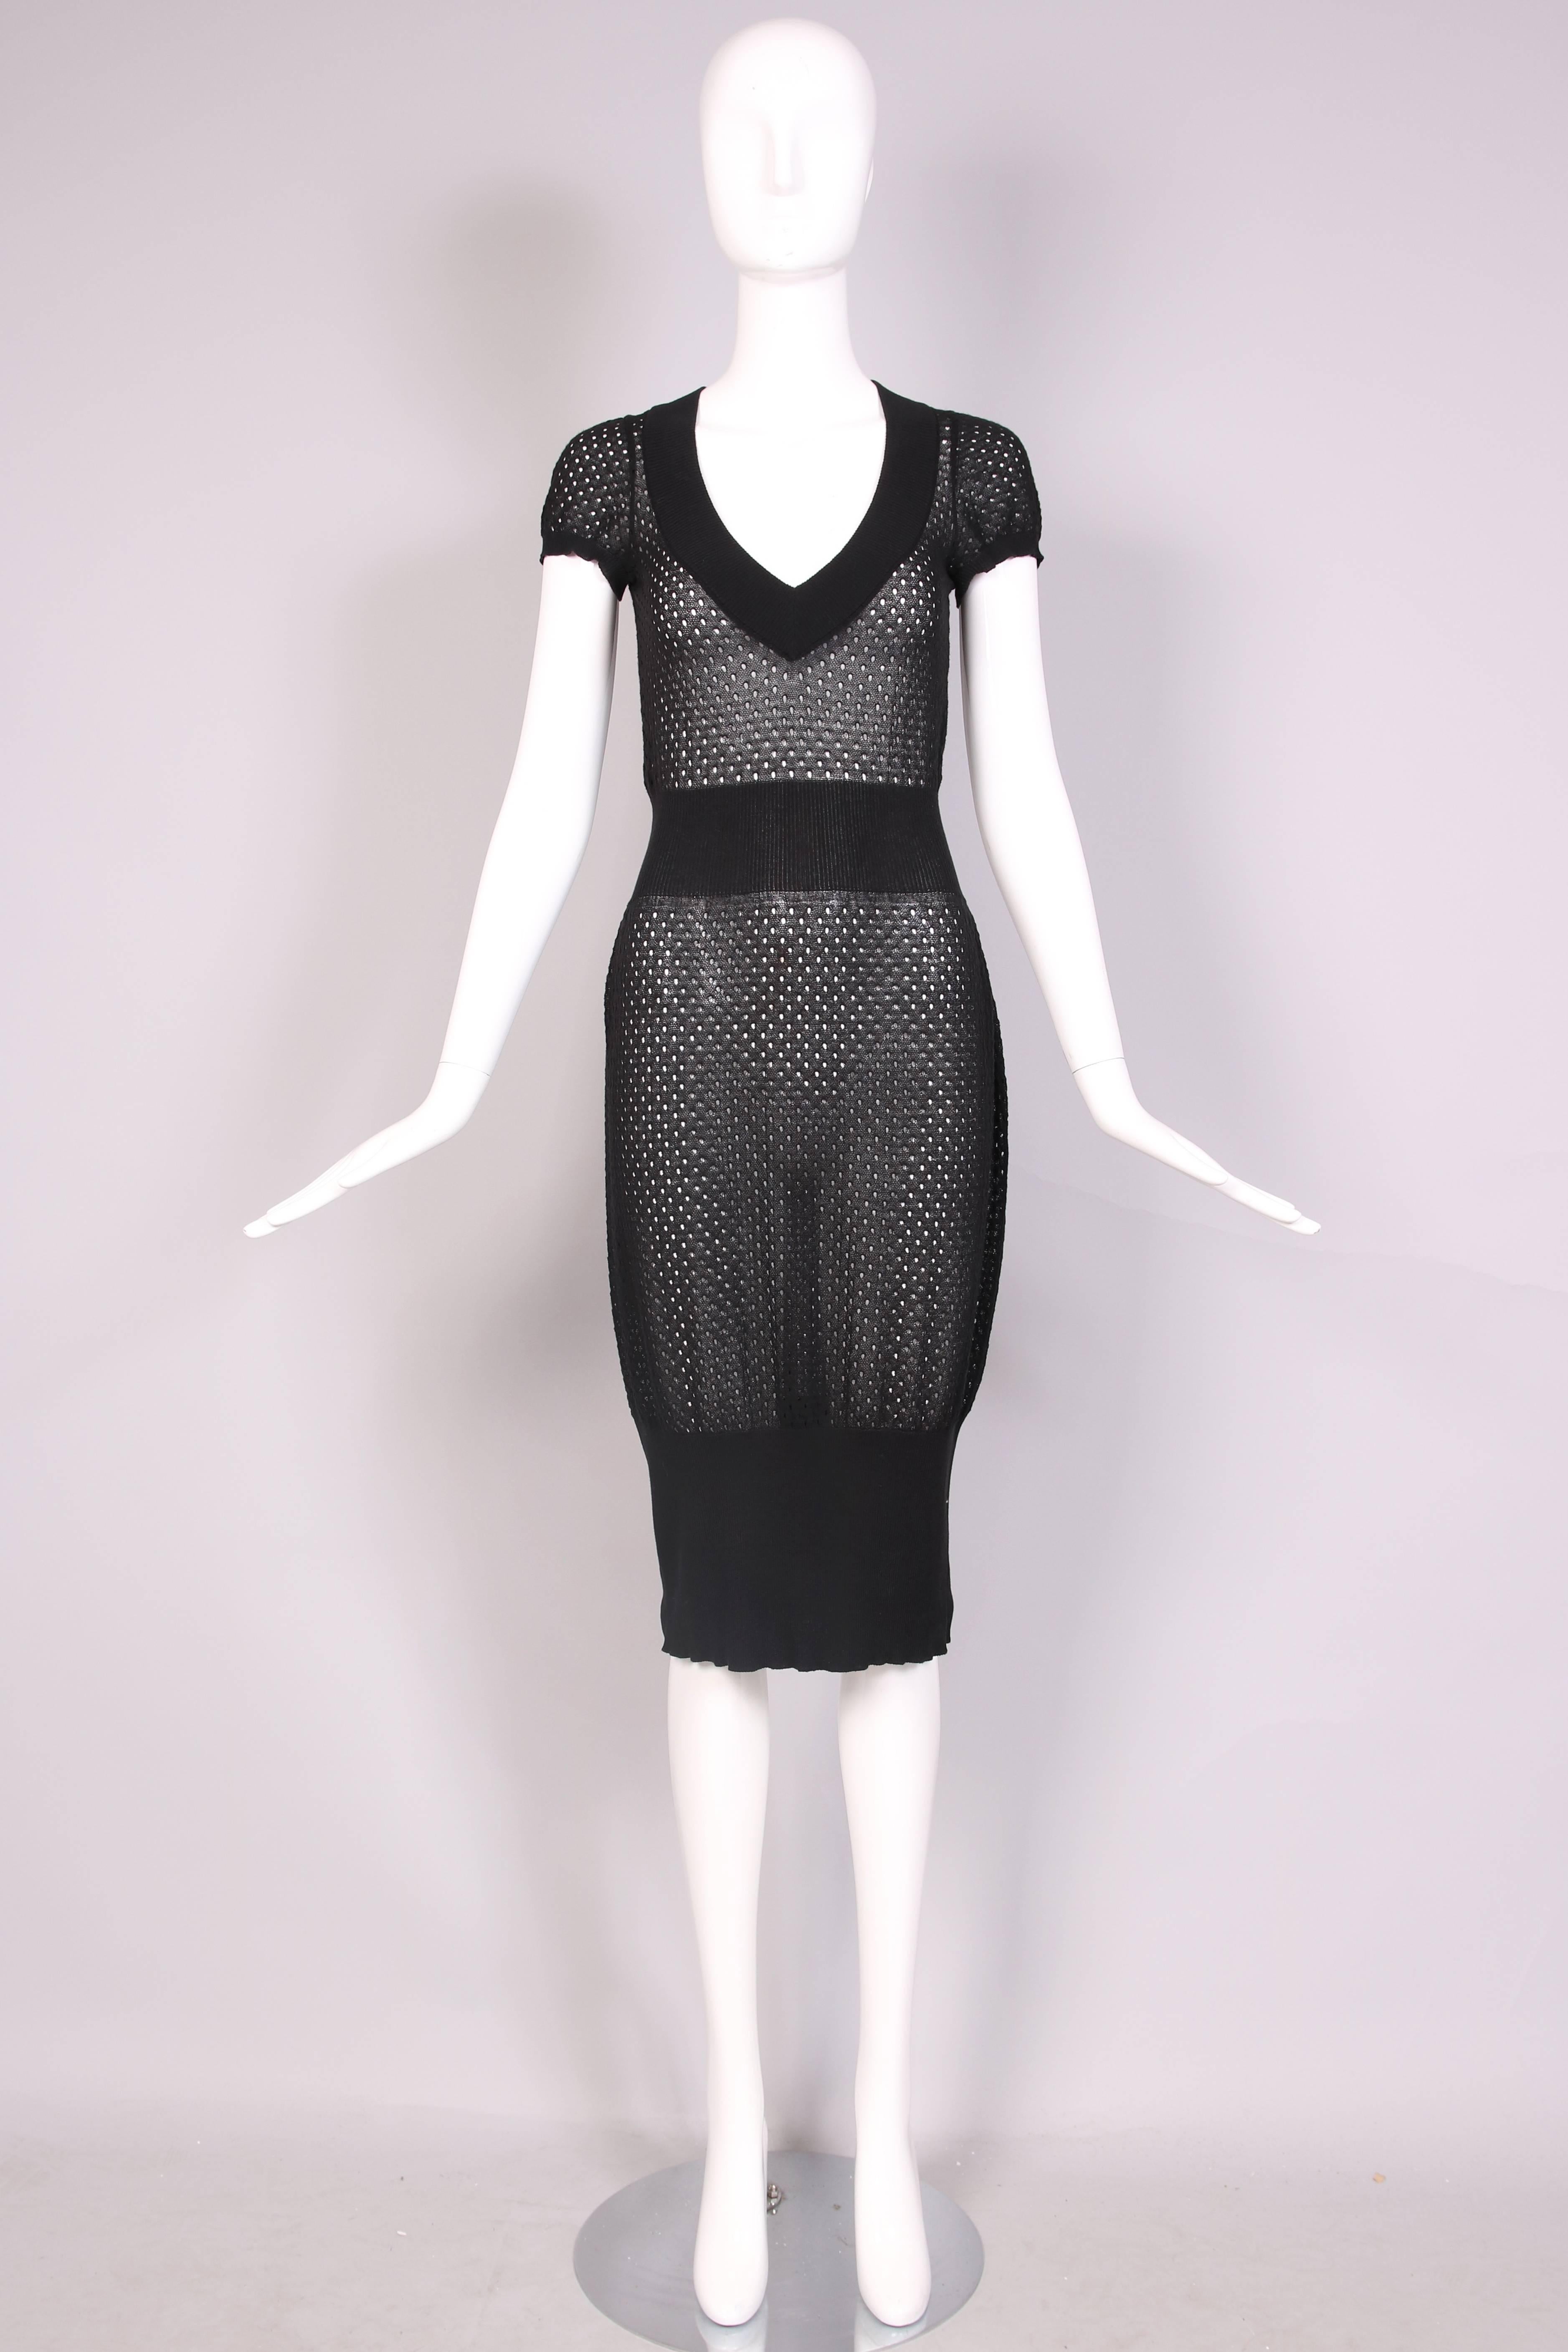 Alaia Black Open Knit Net Dress In Excellent Condition In Studio City, CA